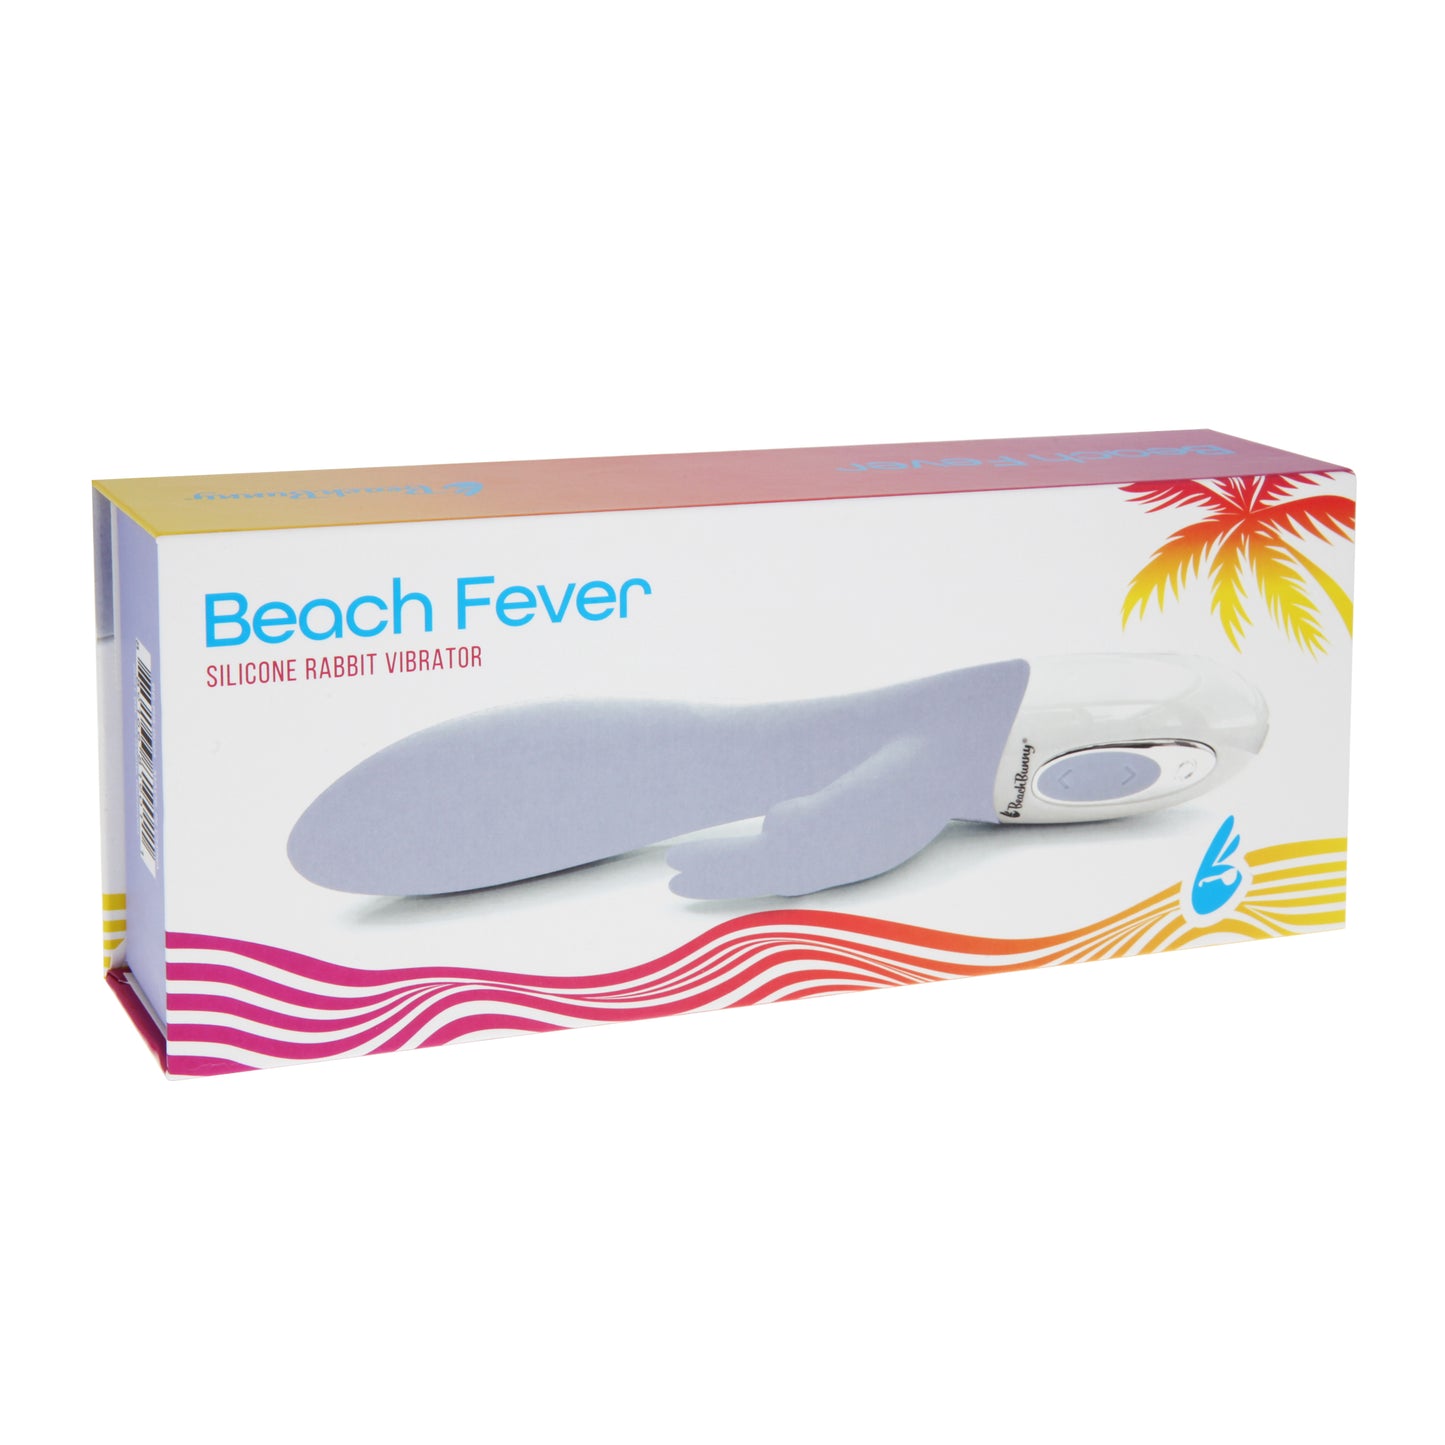 Warming Rabbit Vibe with Swirling Shaft - Beach Fever